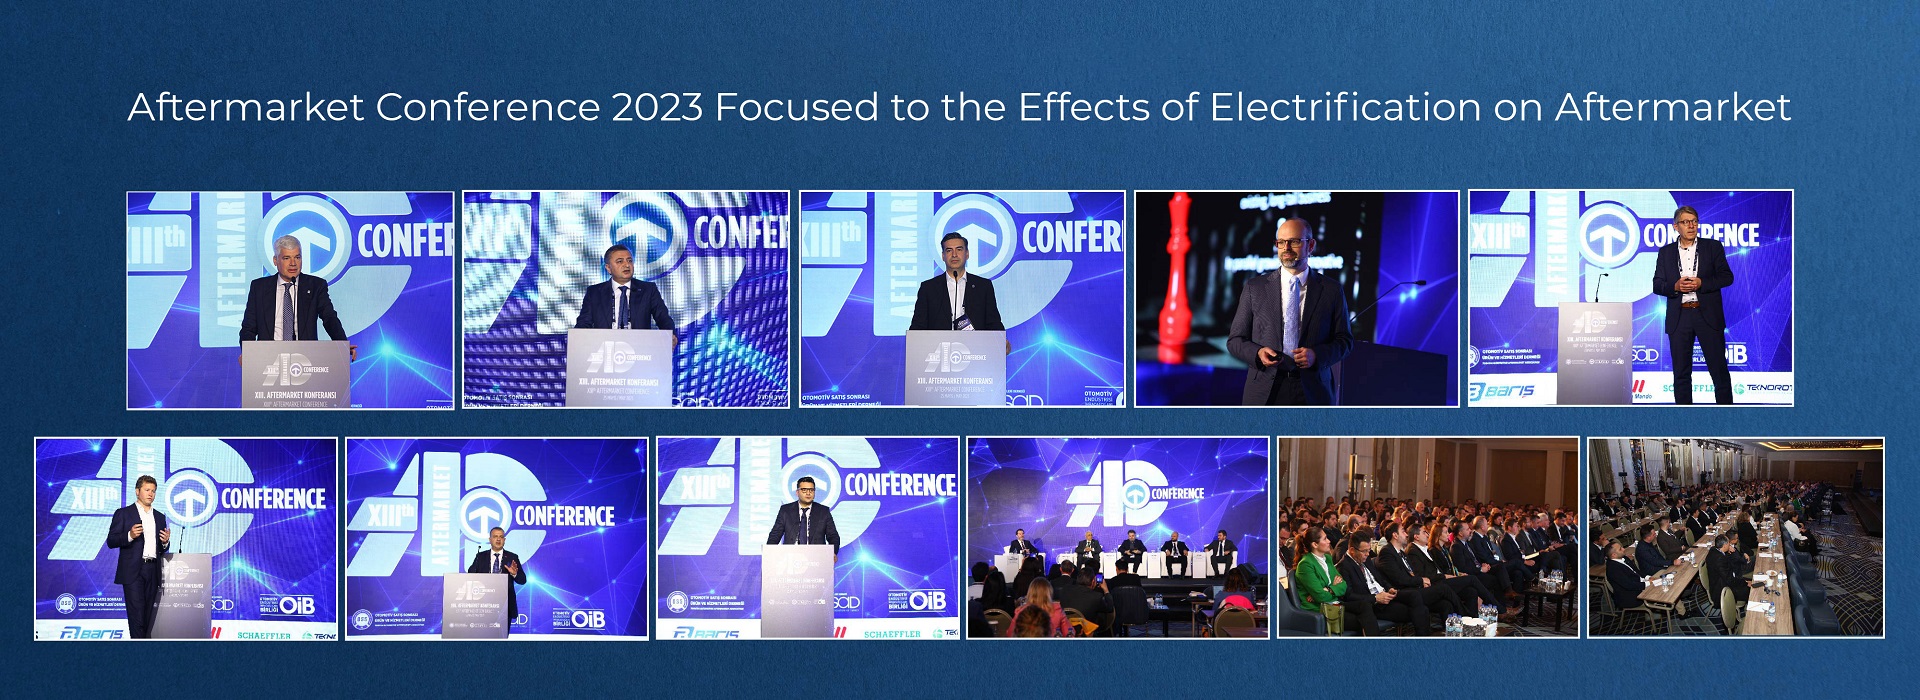 Aftermarket Conference 2023 Focused to the Effects of Electrification on Aftermarket